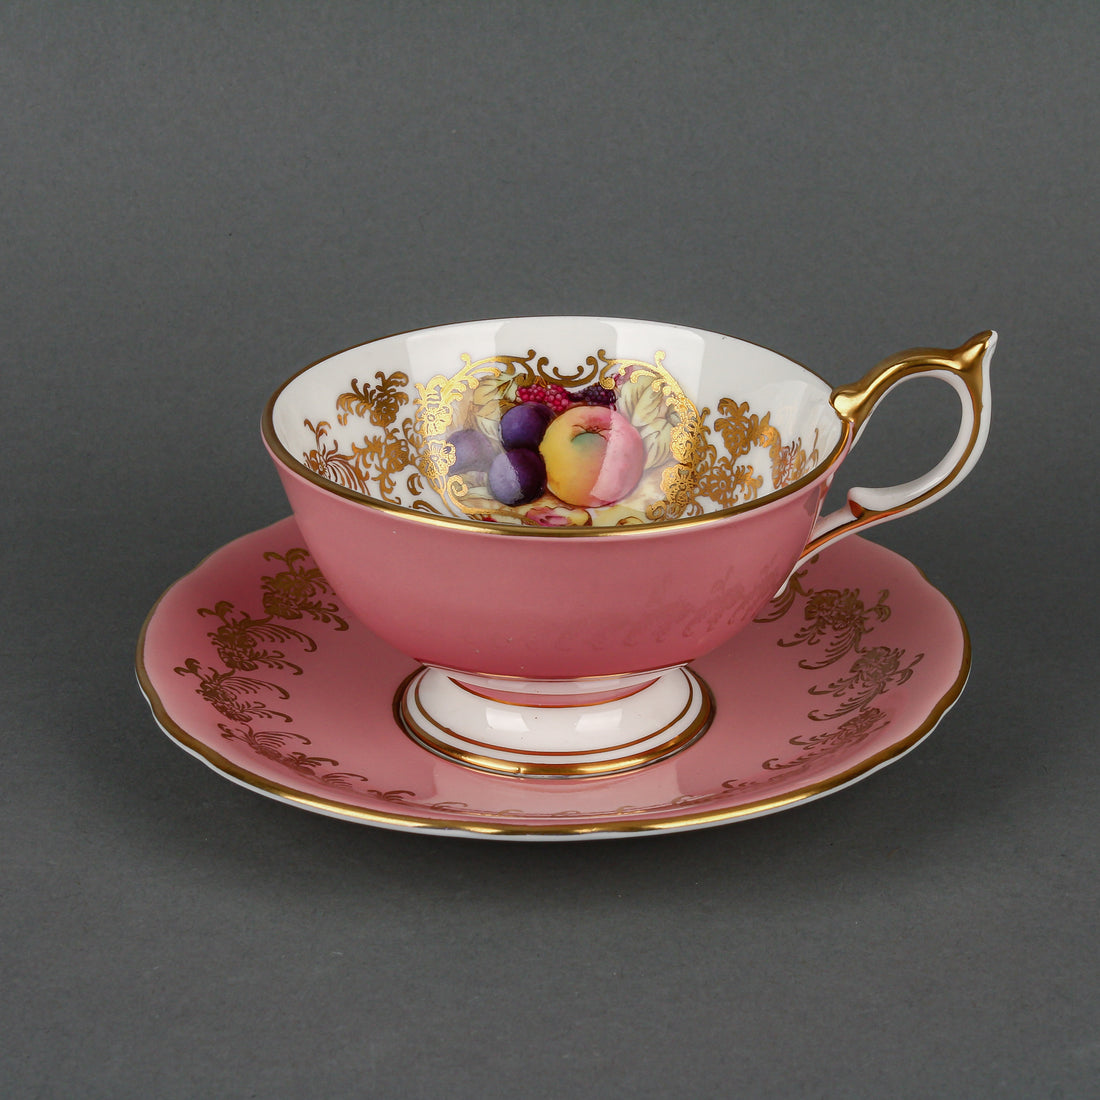 AYNSLEY Orchard Fruit Cup & Saucer 2654